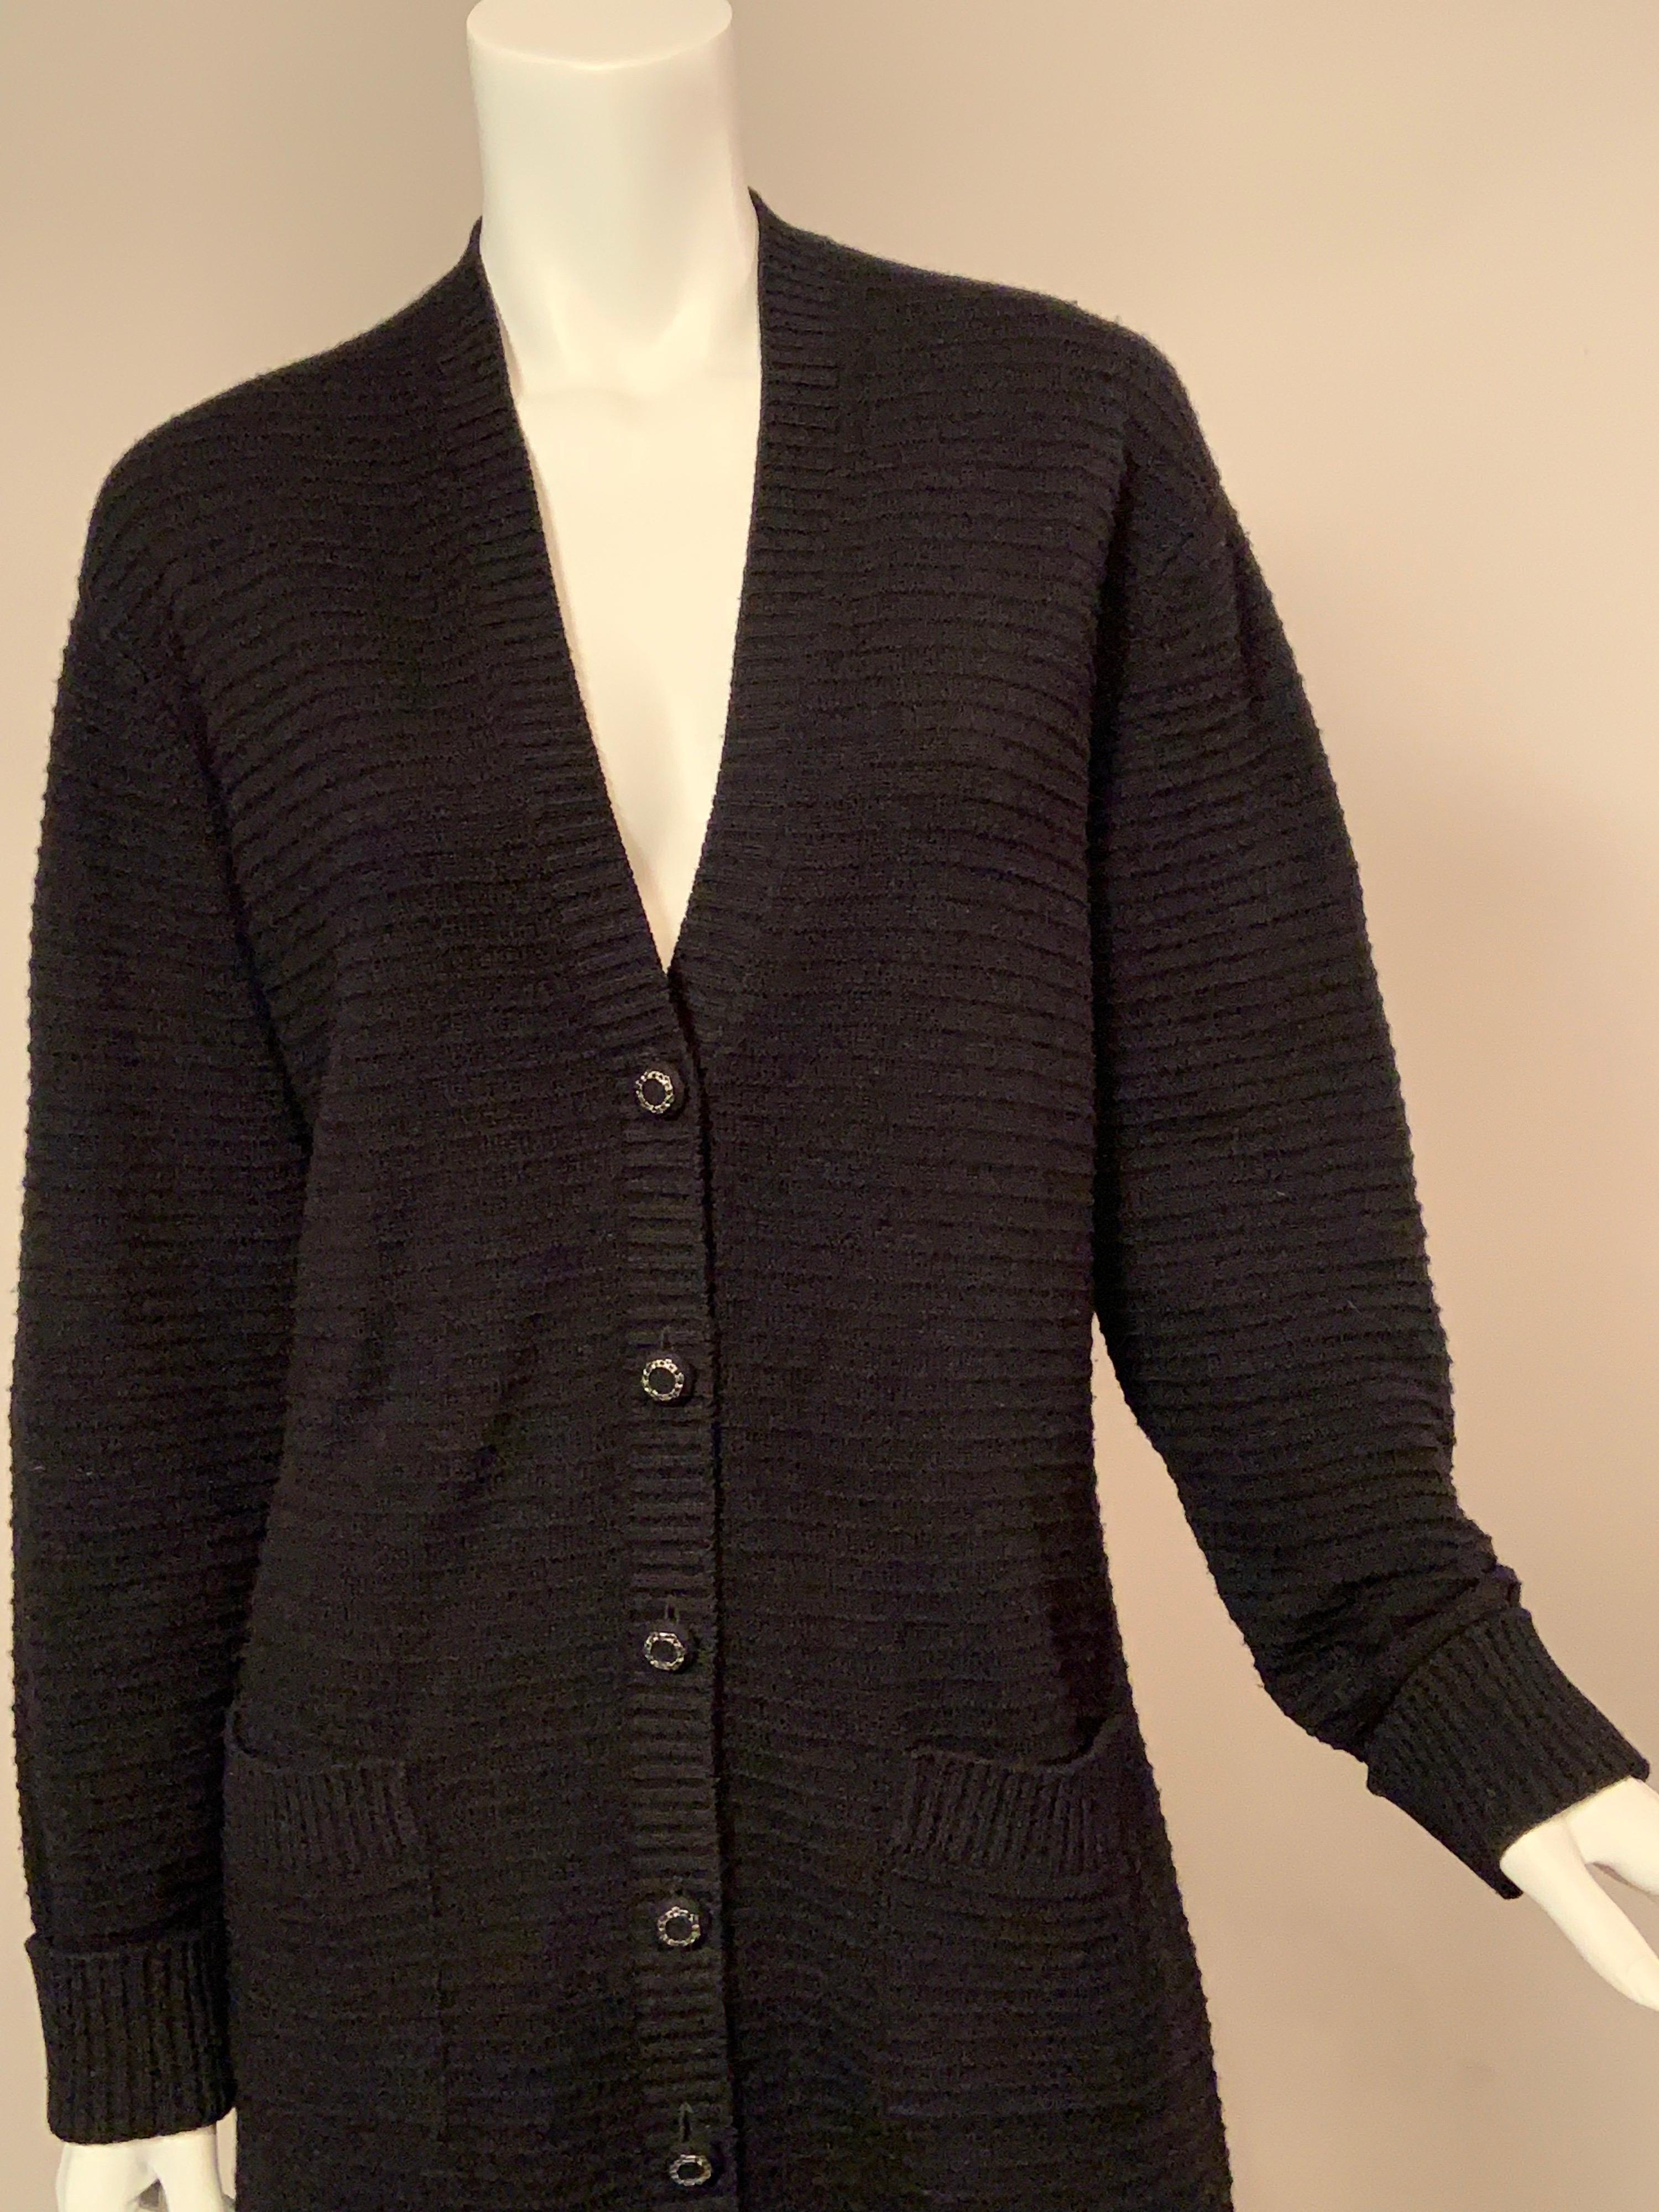 Chanel Black Cashmere Long Cardigan Sweater, Larger Size 10